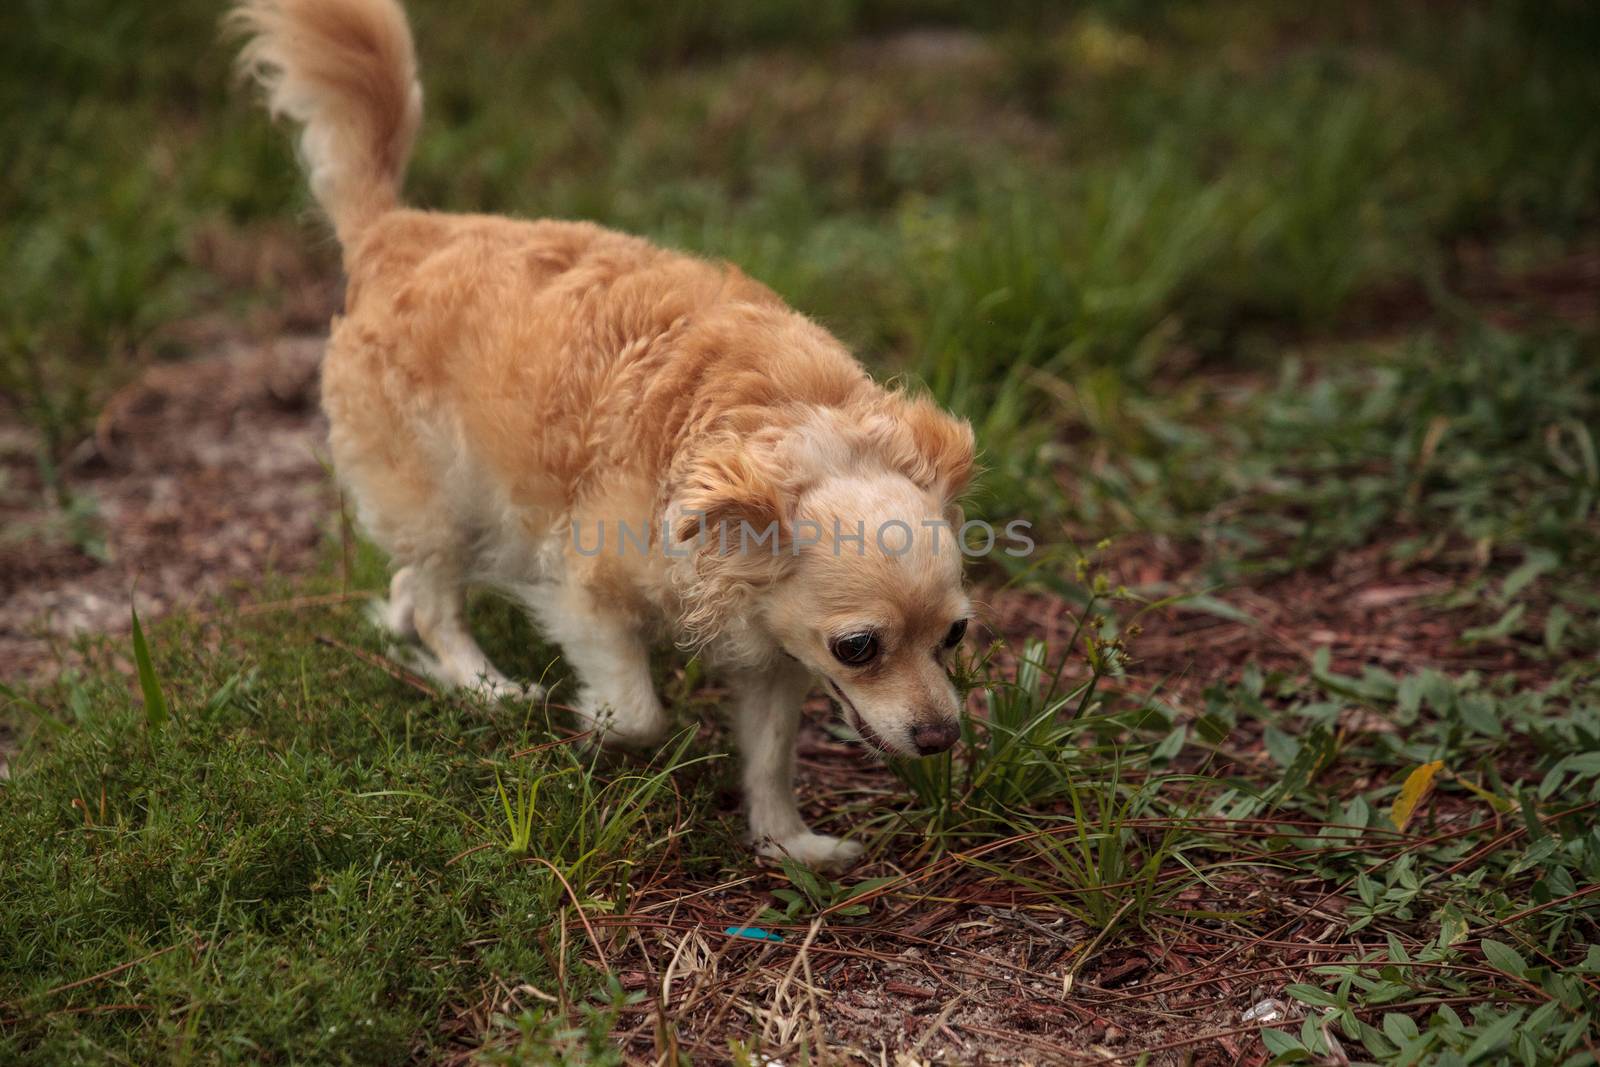 Curious blond Chihuahua dog explores a tropical garden in Florida.